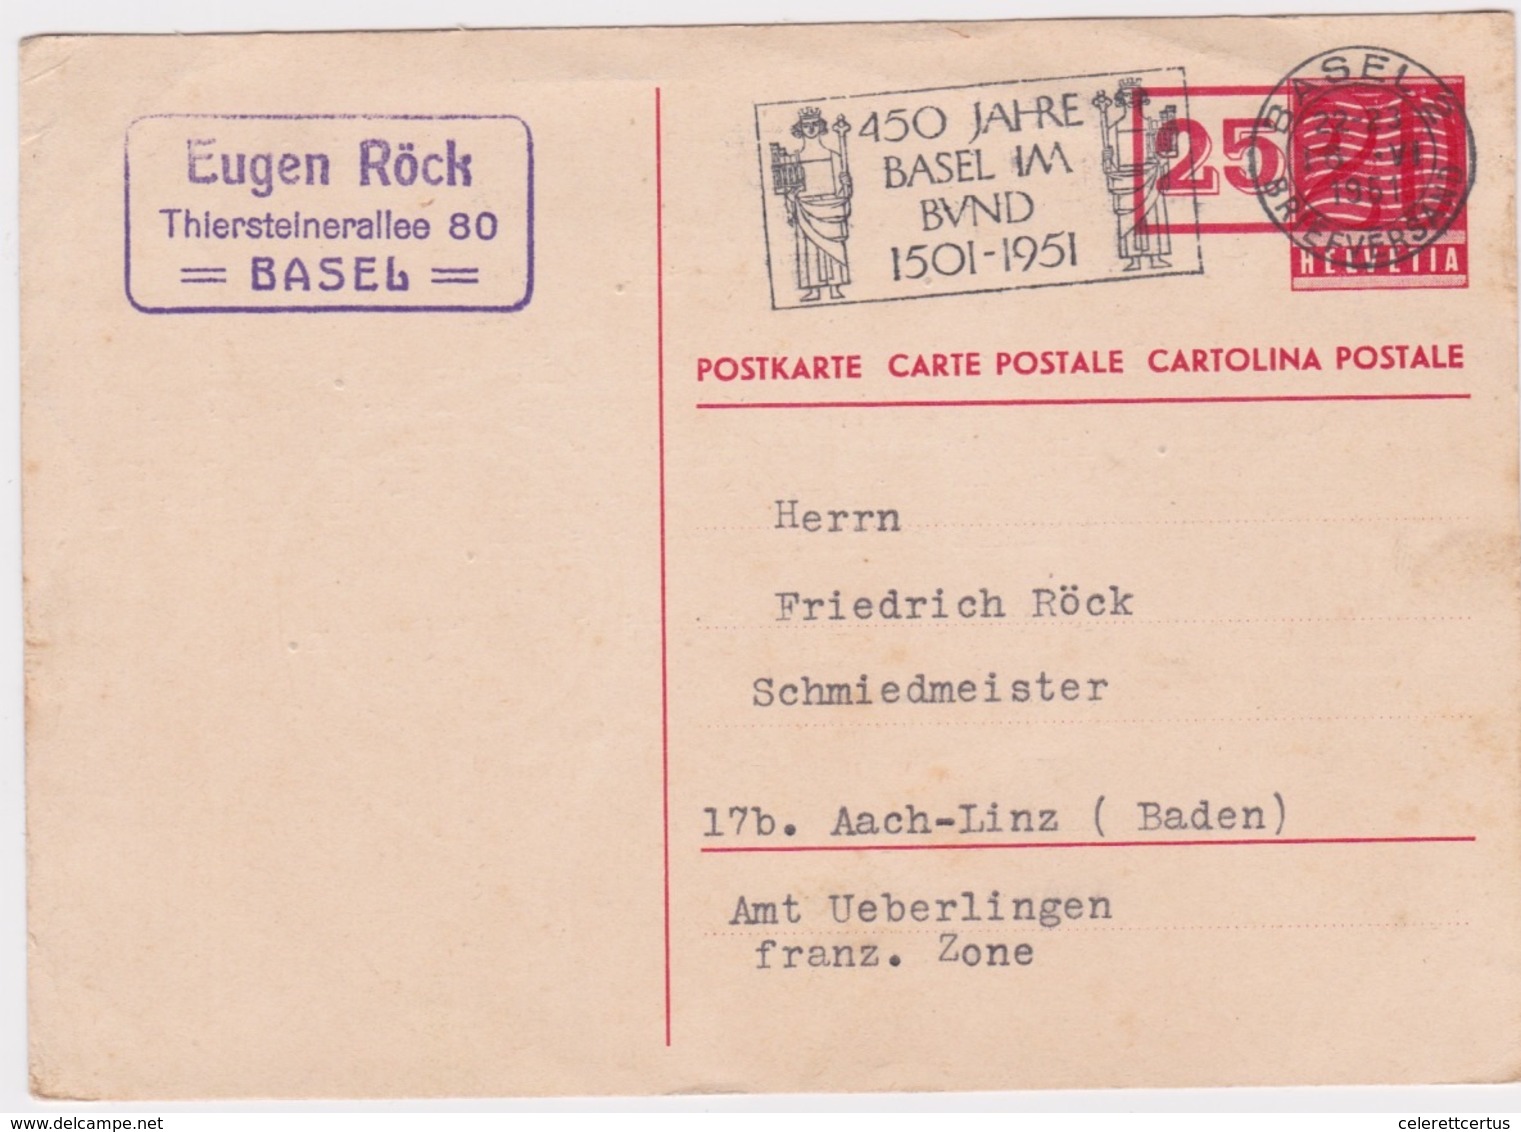 Switzerland-1951 Revalued 25 C On 20 C Red PS Postcard Cover Cancelled 450 Year Of The City Of Basel Slogan Postmark - Stamped Stationery